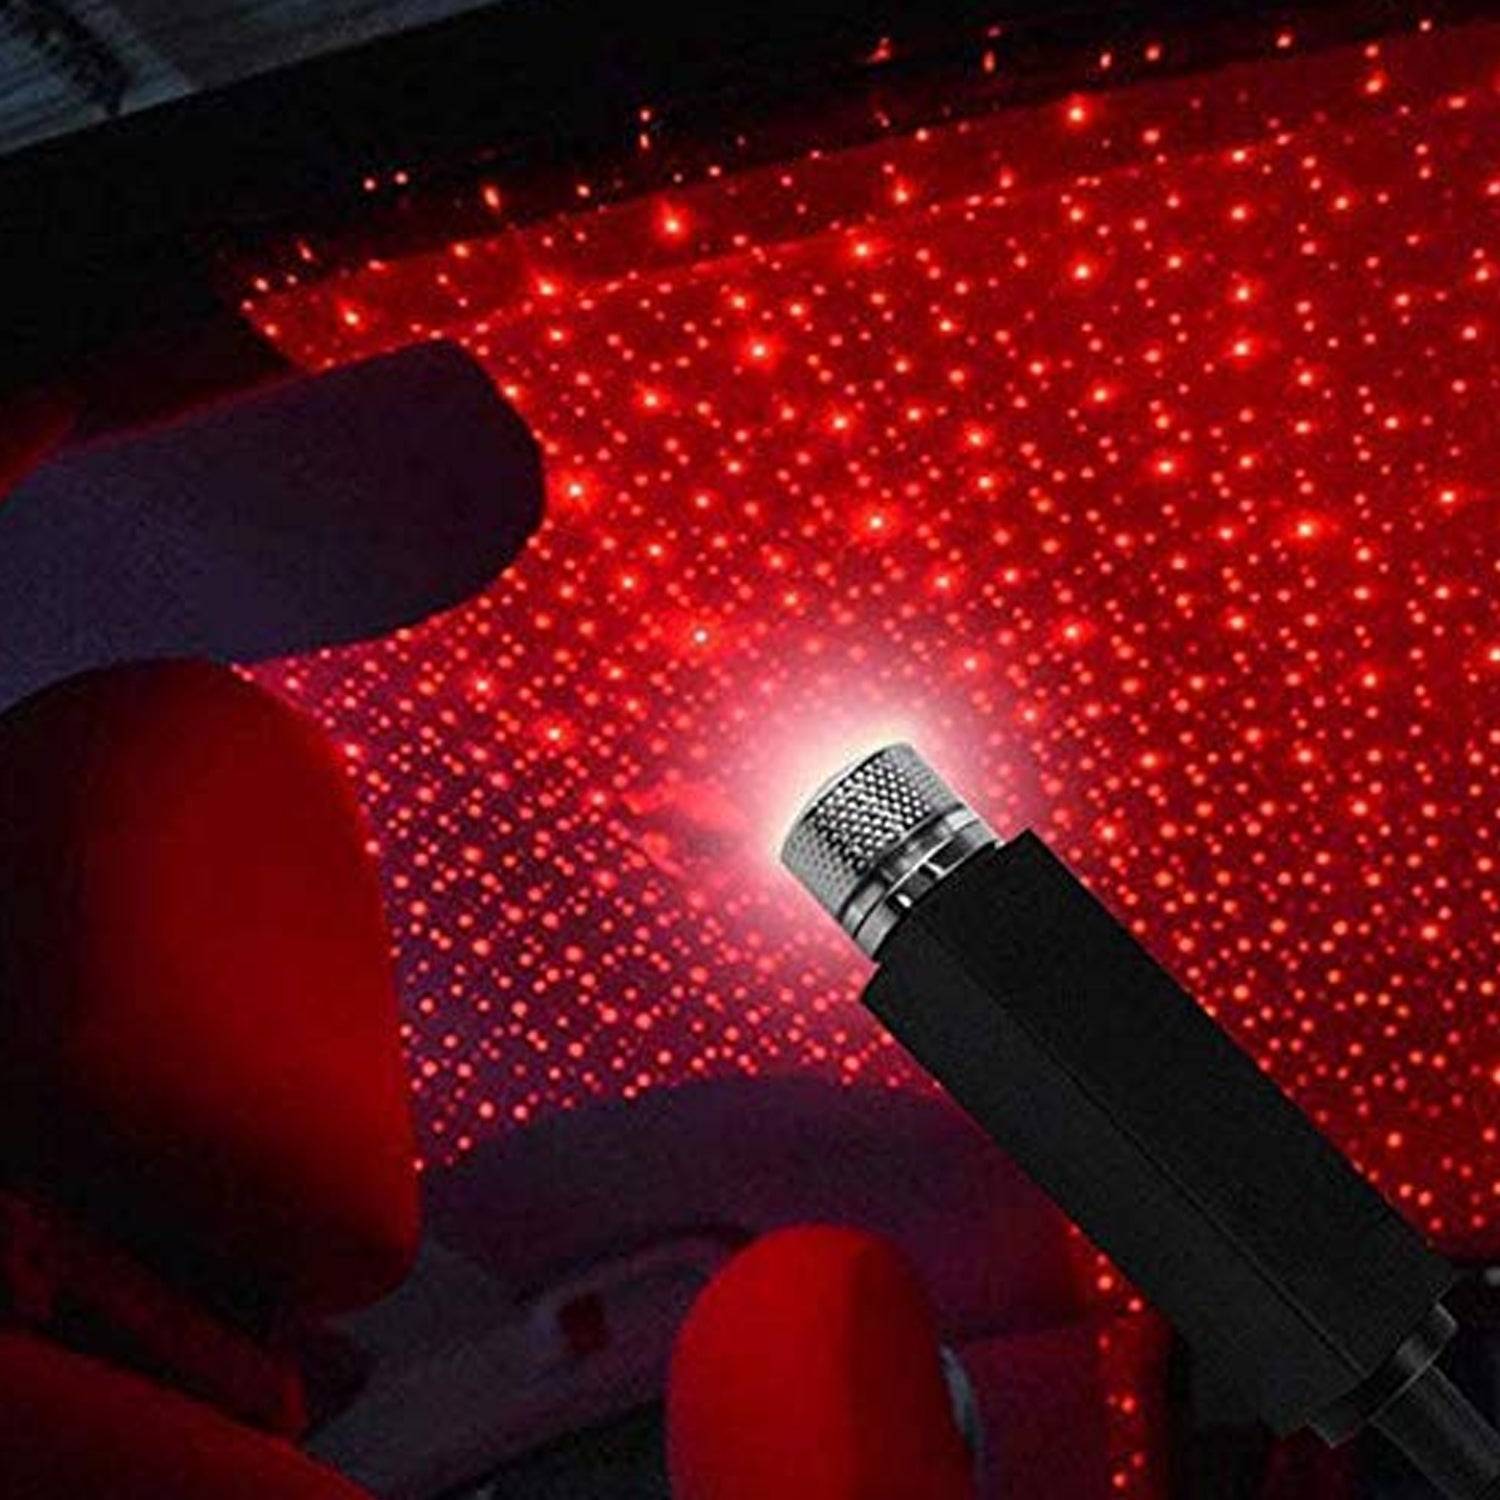 7290  Multipurpose Laser Light Light Galaxy Night Sky Ambiance Laser Micro Projector Atmosphere Ambient Roof Usb Light, Car, Ceiling, Bedroom for Party (1 Pc)